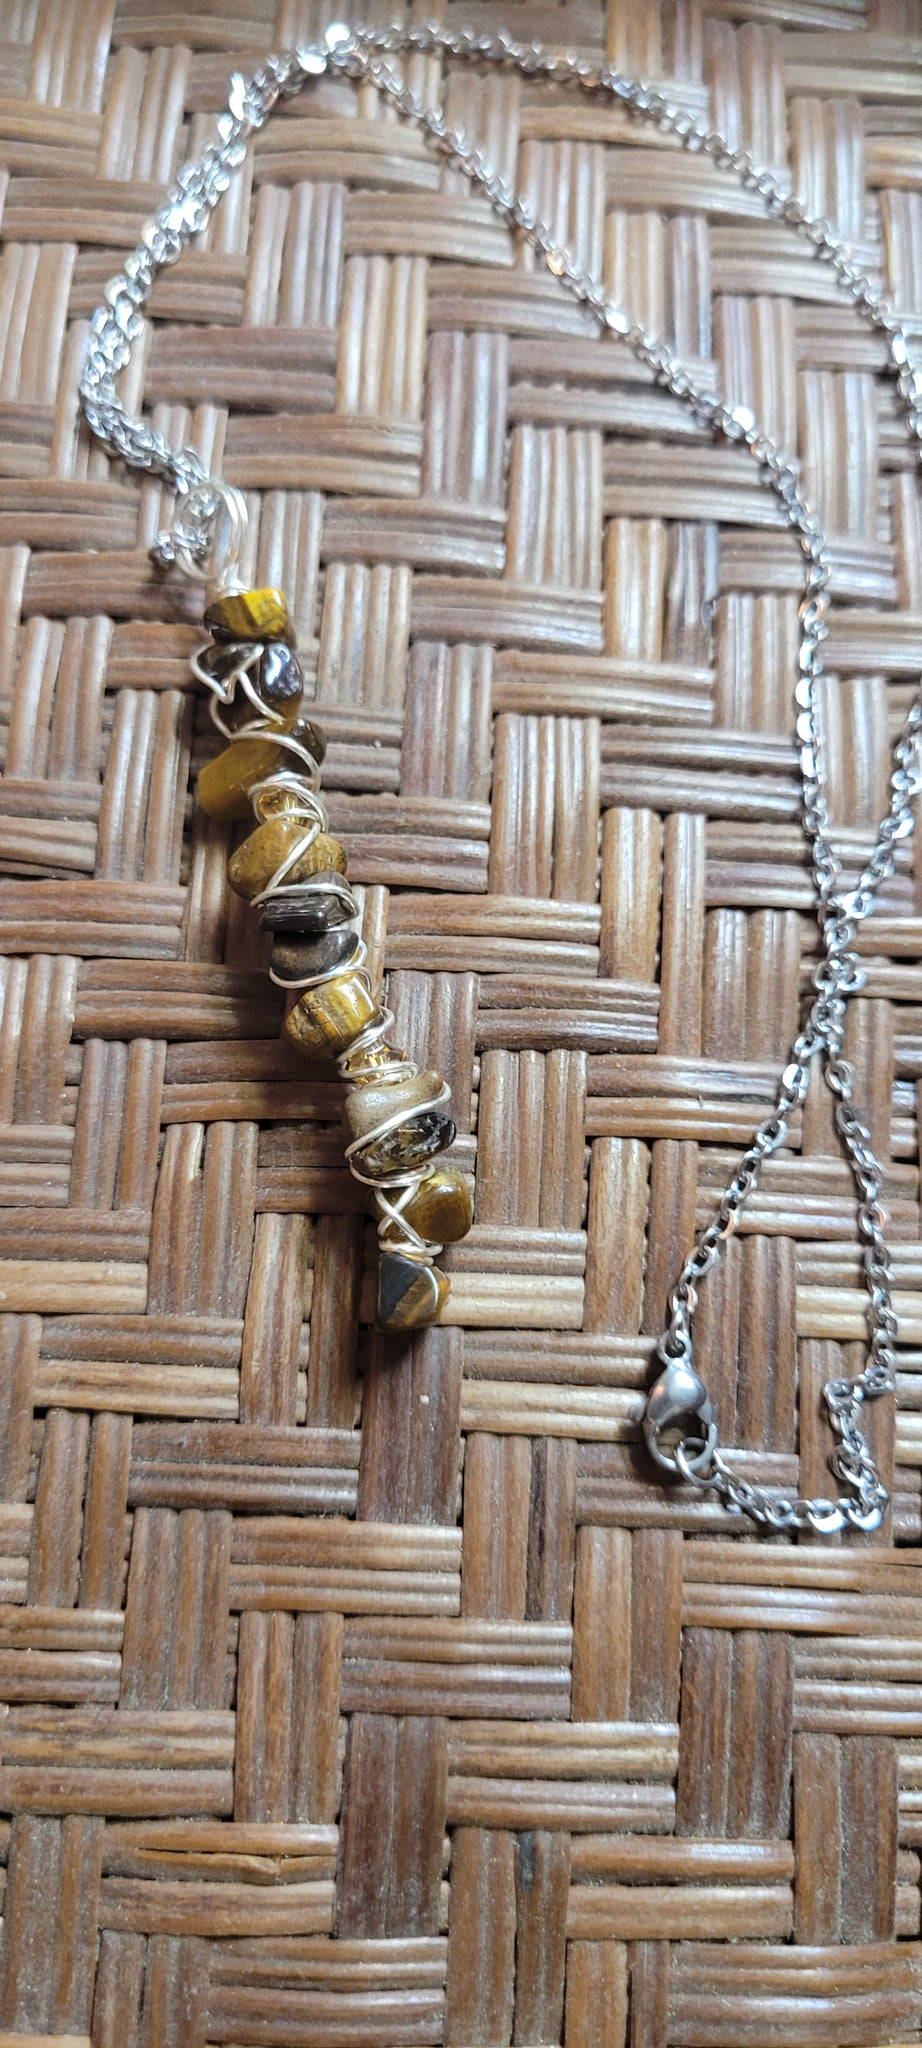 Gemstone Pendants- Tiger Eye Gemstone Chip Hand Wrapped Pendant by Jules on 20 in Stainless Steel Chain